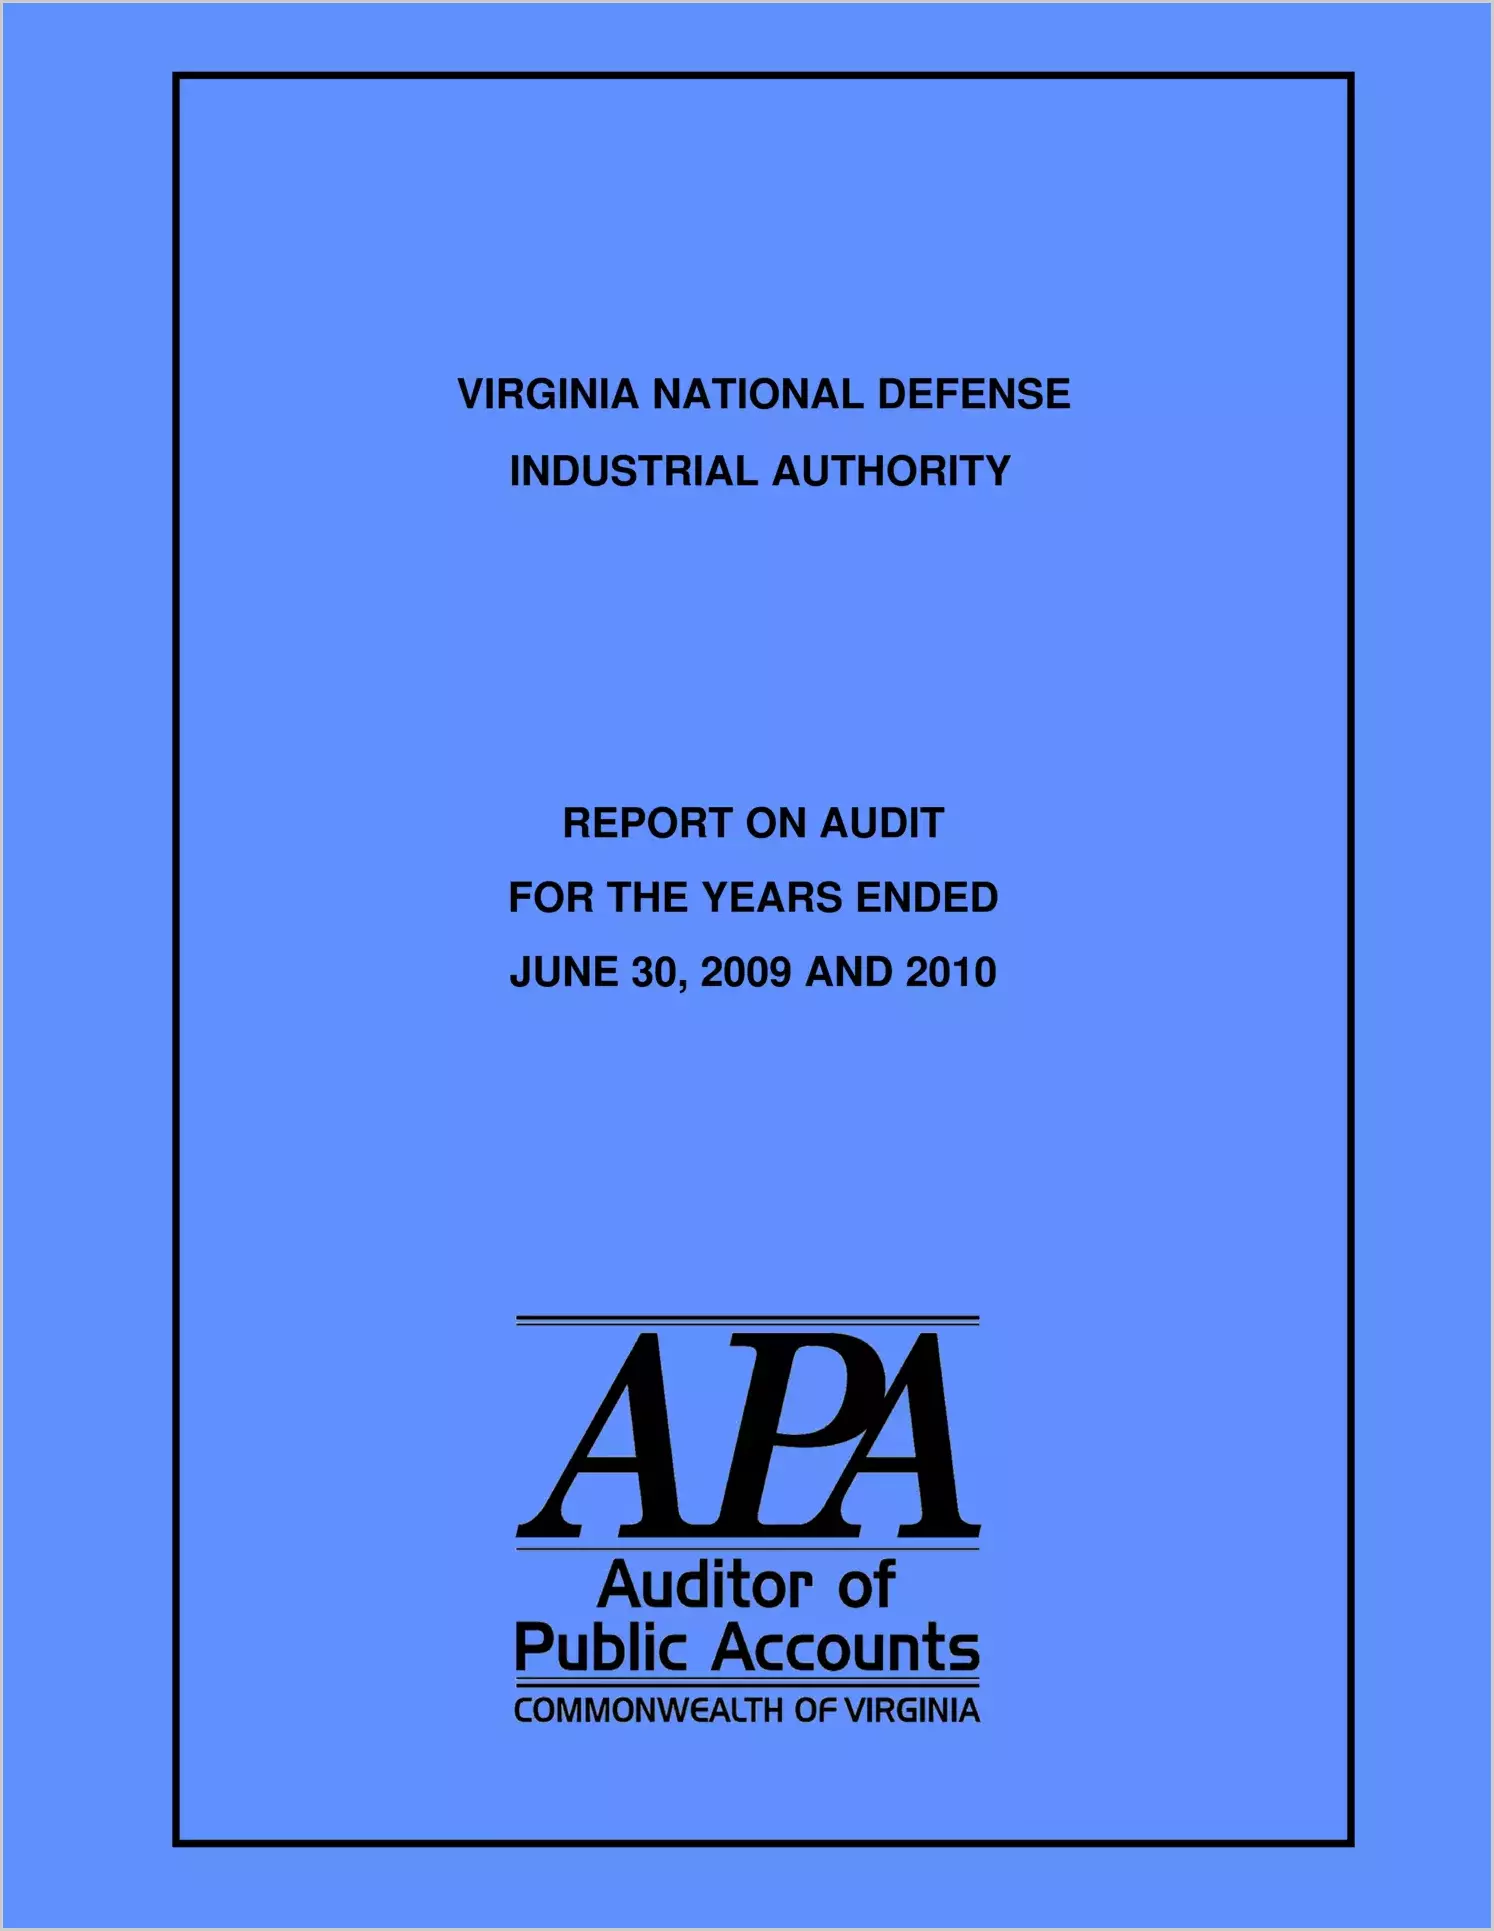 Virginia National Defense Industrial Authority Report on Audit for the years ended June 30, 2009 and 2010